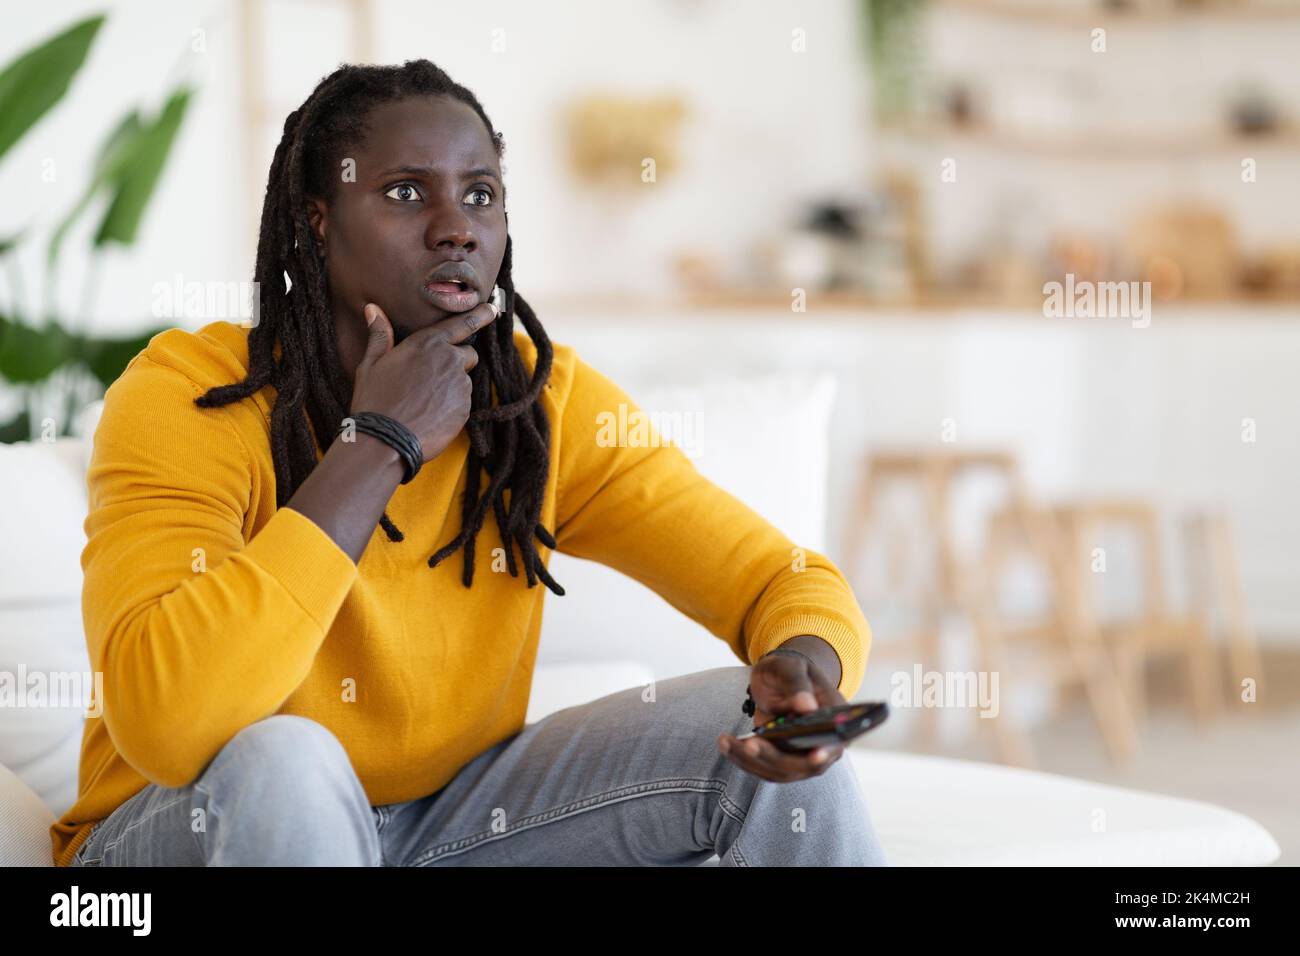 Amazed Young Black Guy Holding Remote Controller And Looking At Tv Screen Stock Photo